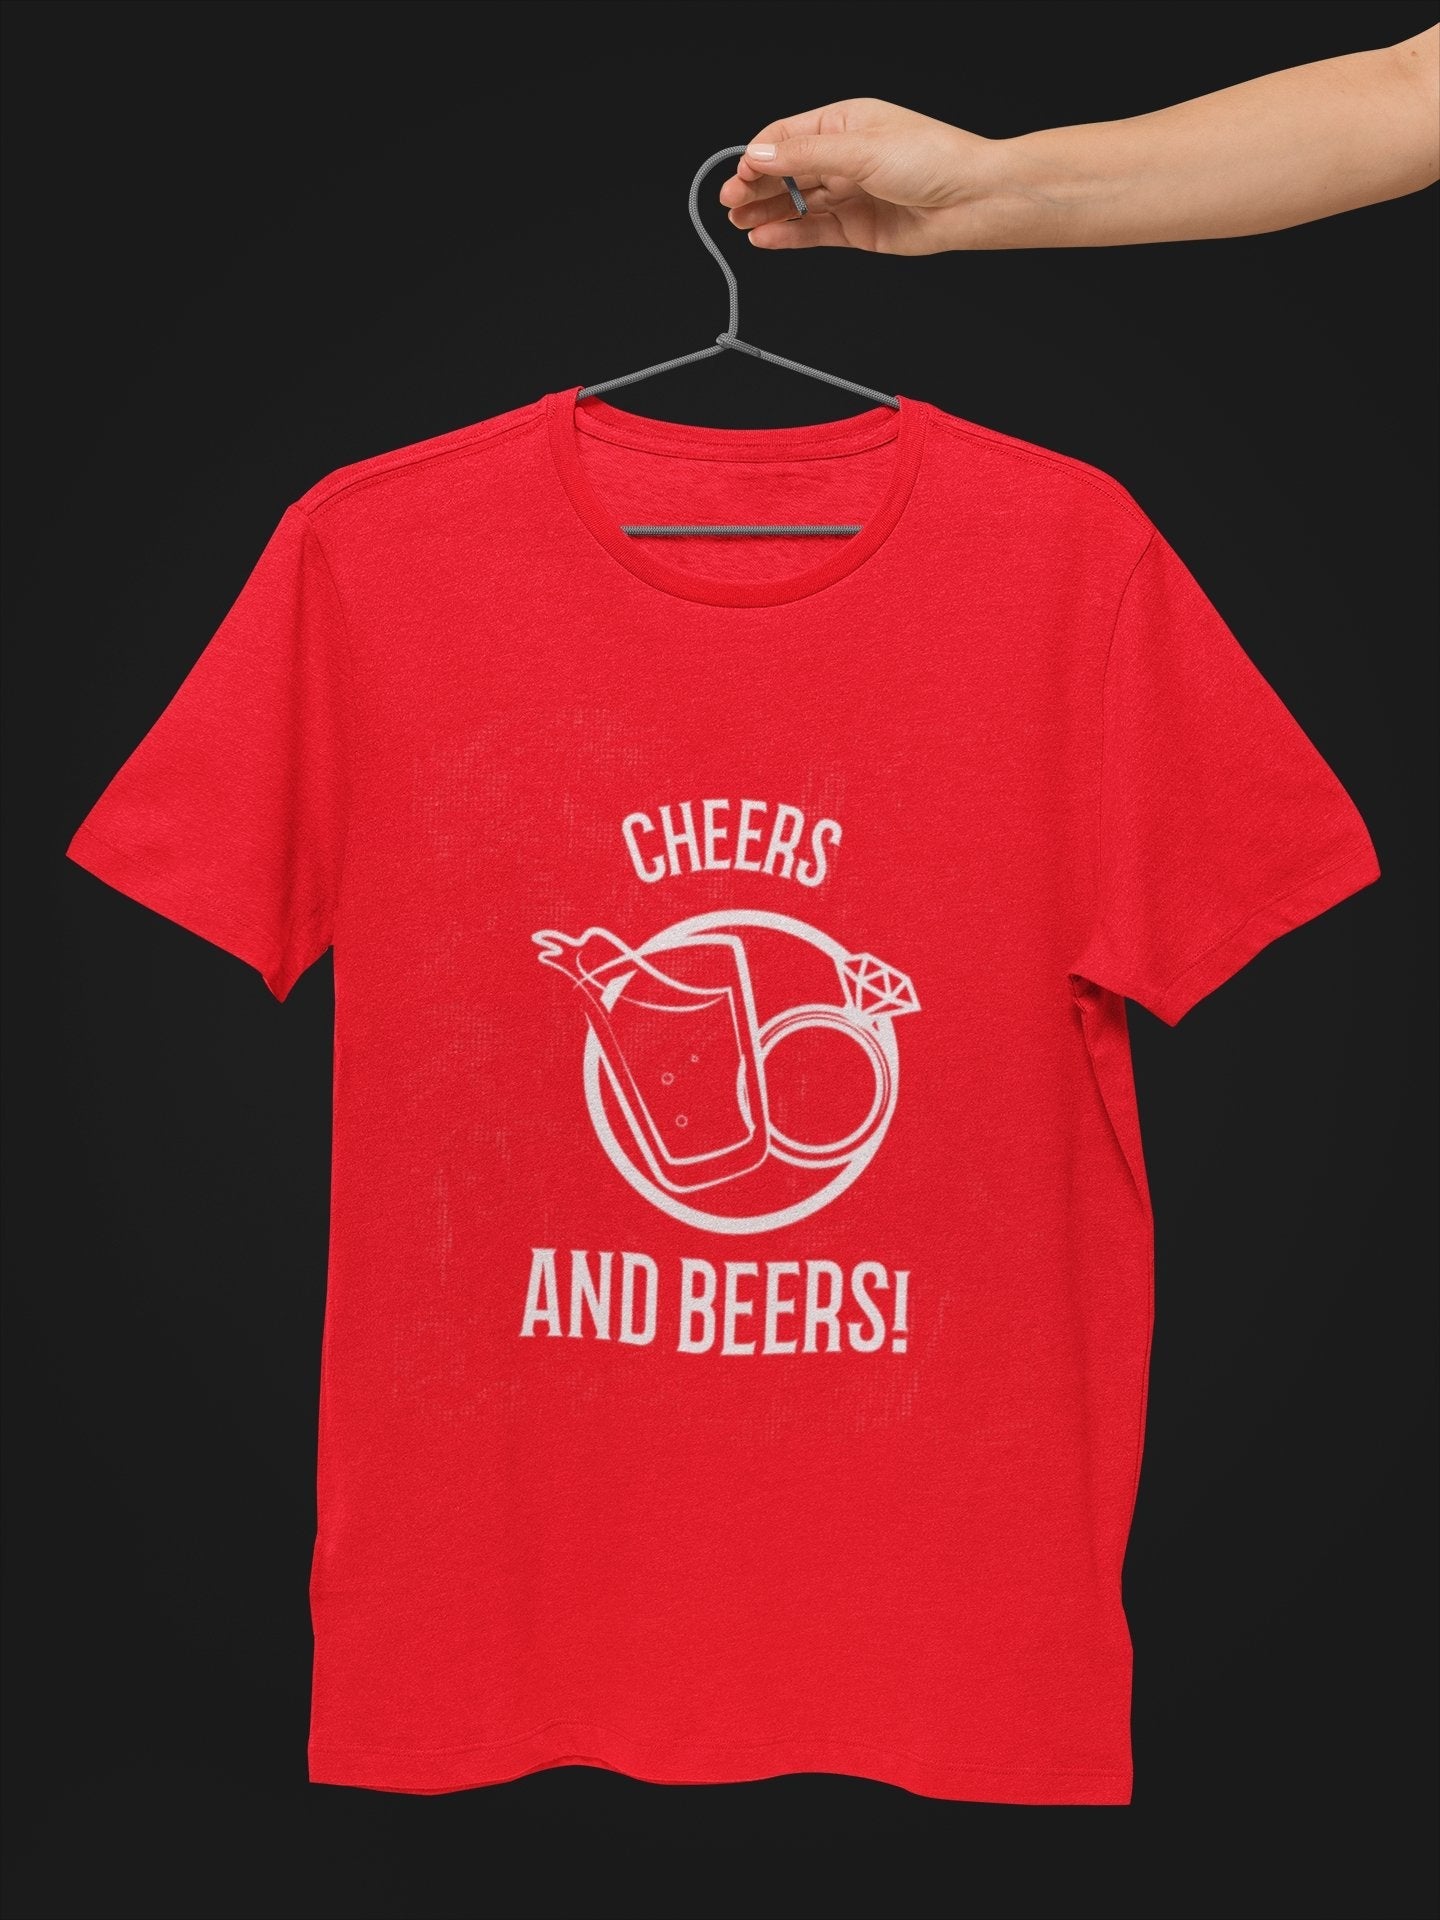 Cheers and Beers Bachelor Party T-Shirt - Insane Tees